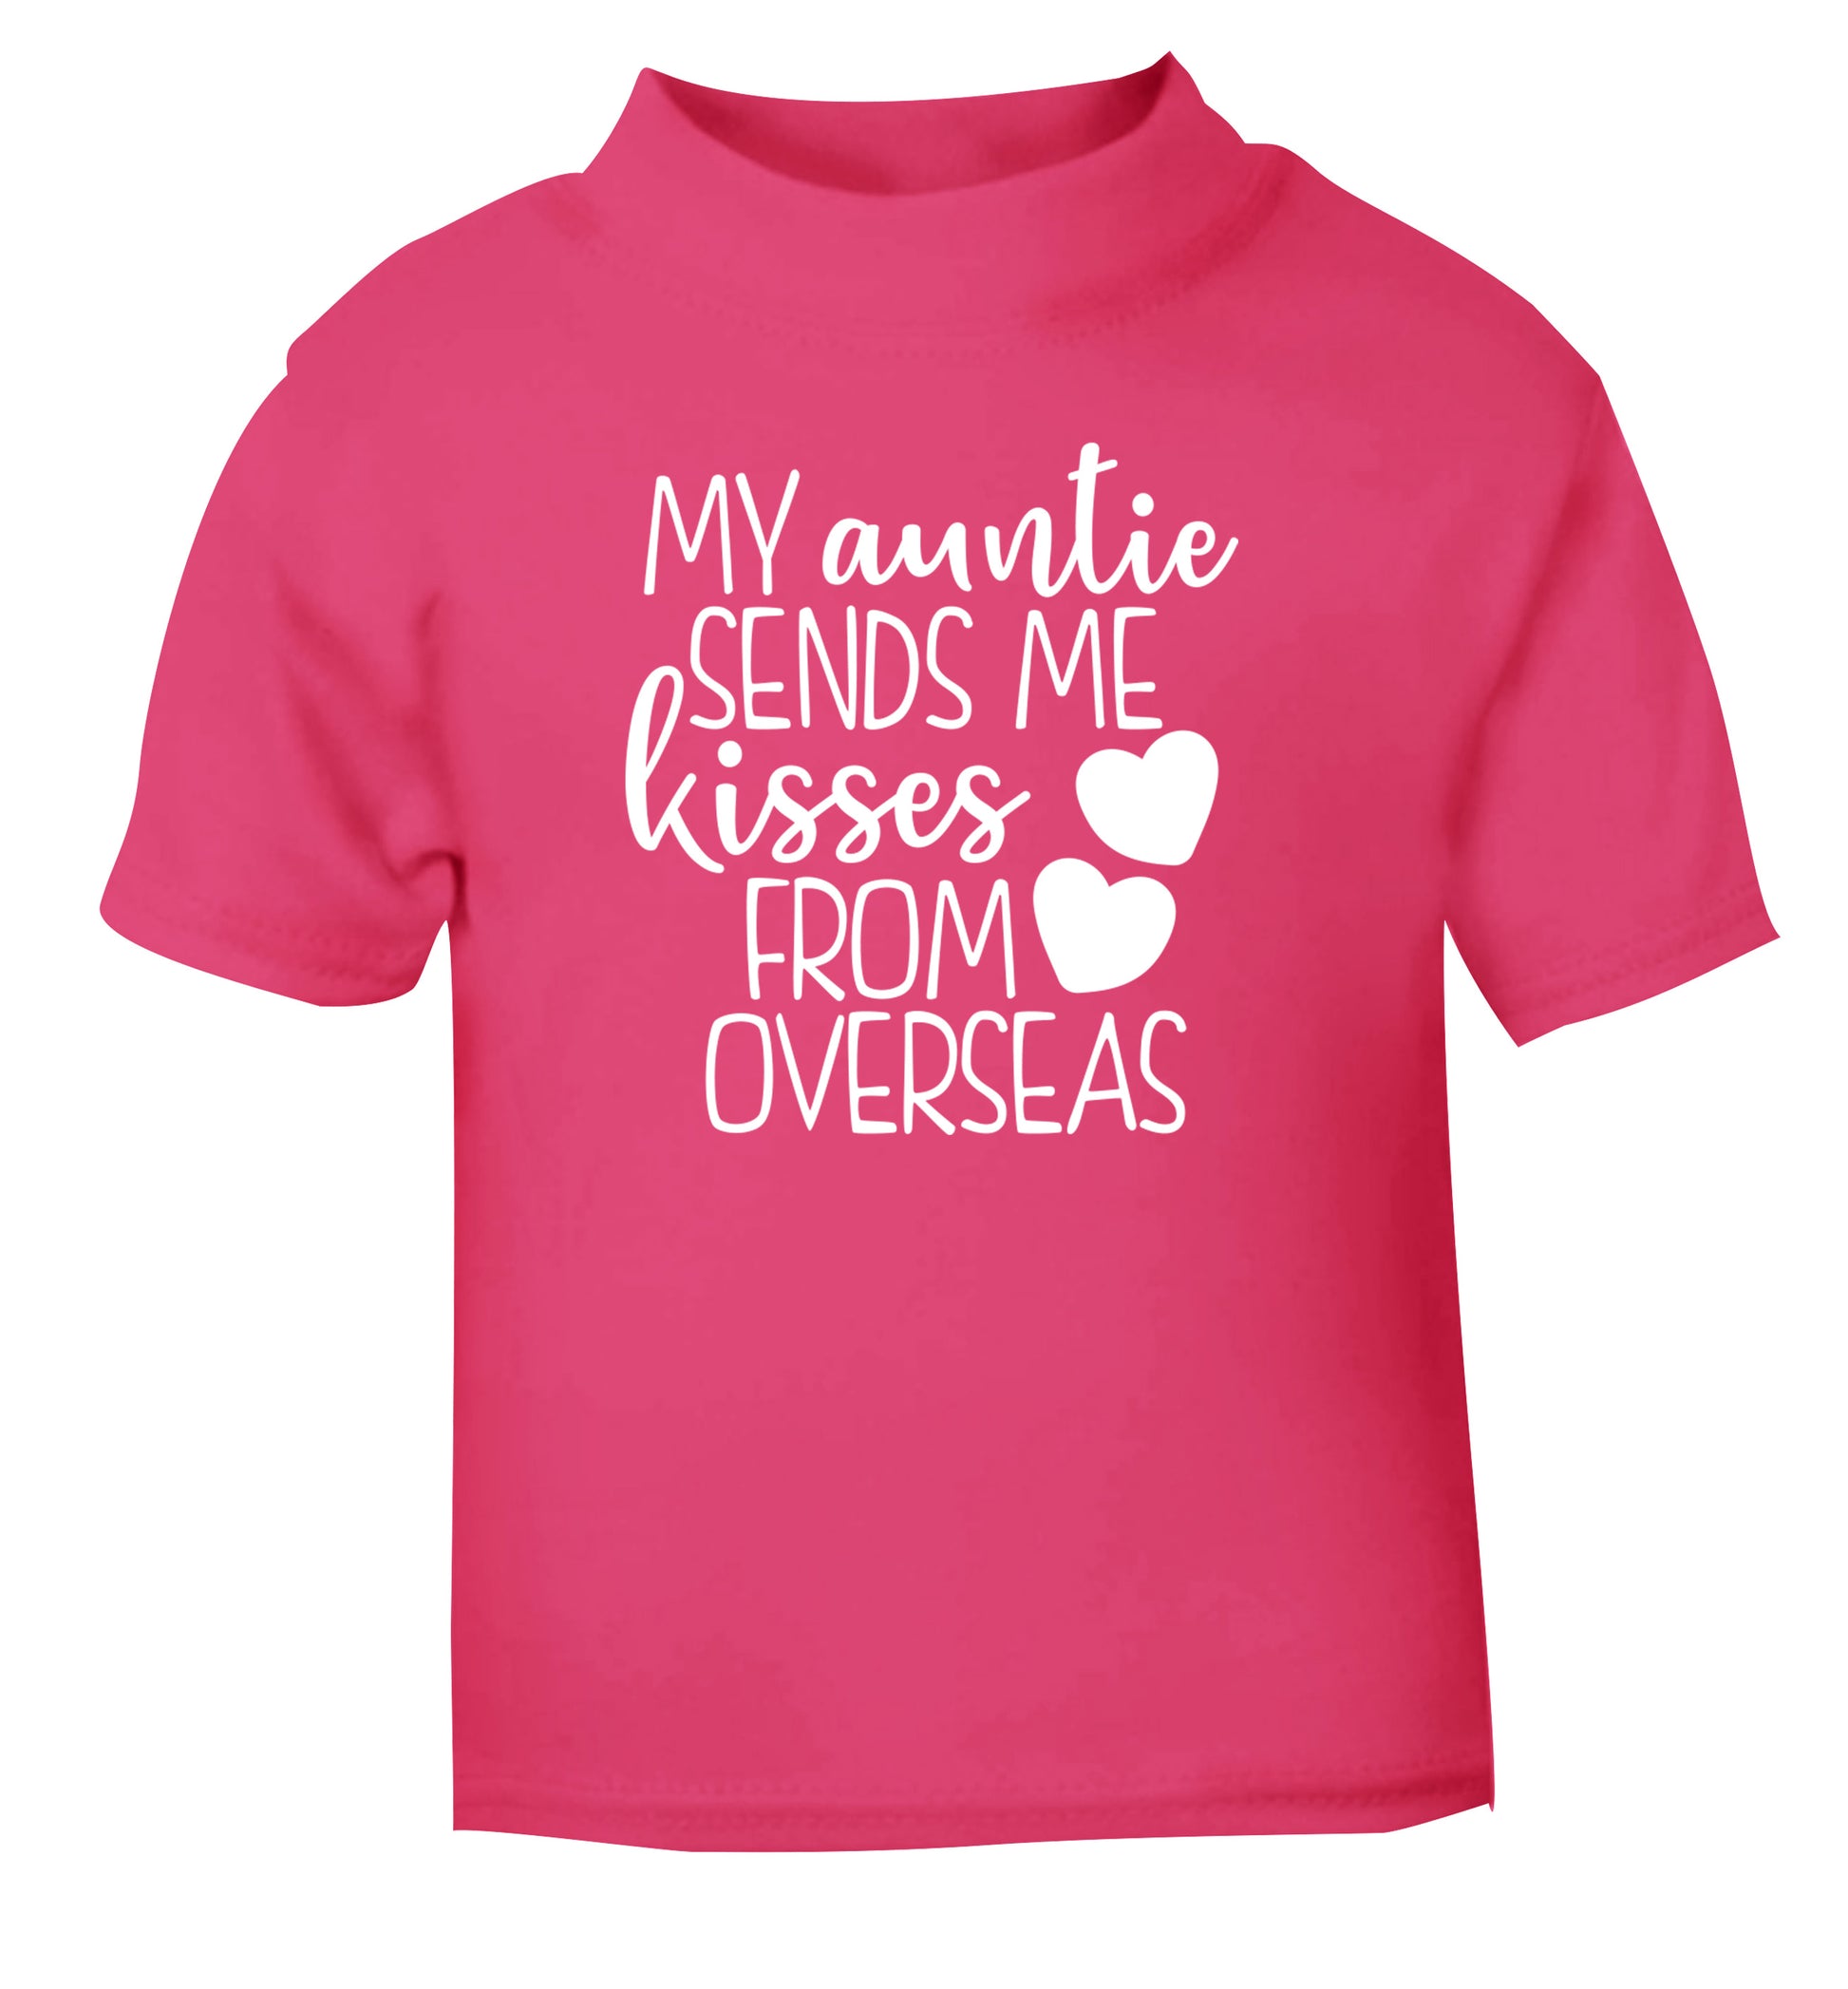 My auntie sends me kisses from overseas pink Baby Toddler Tshirt 2 Years